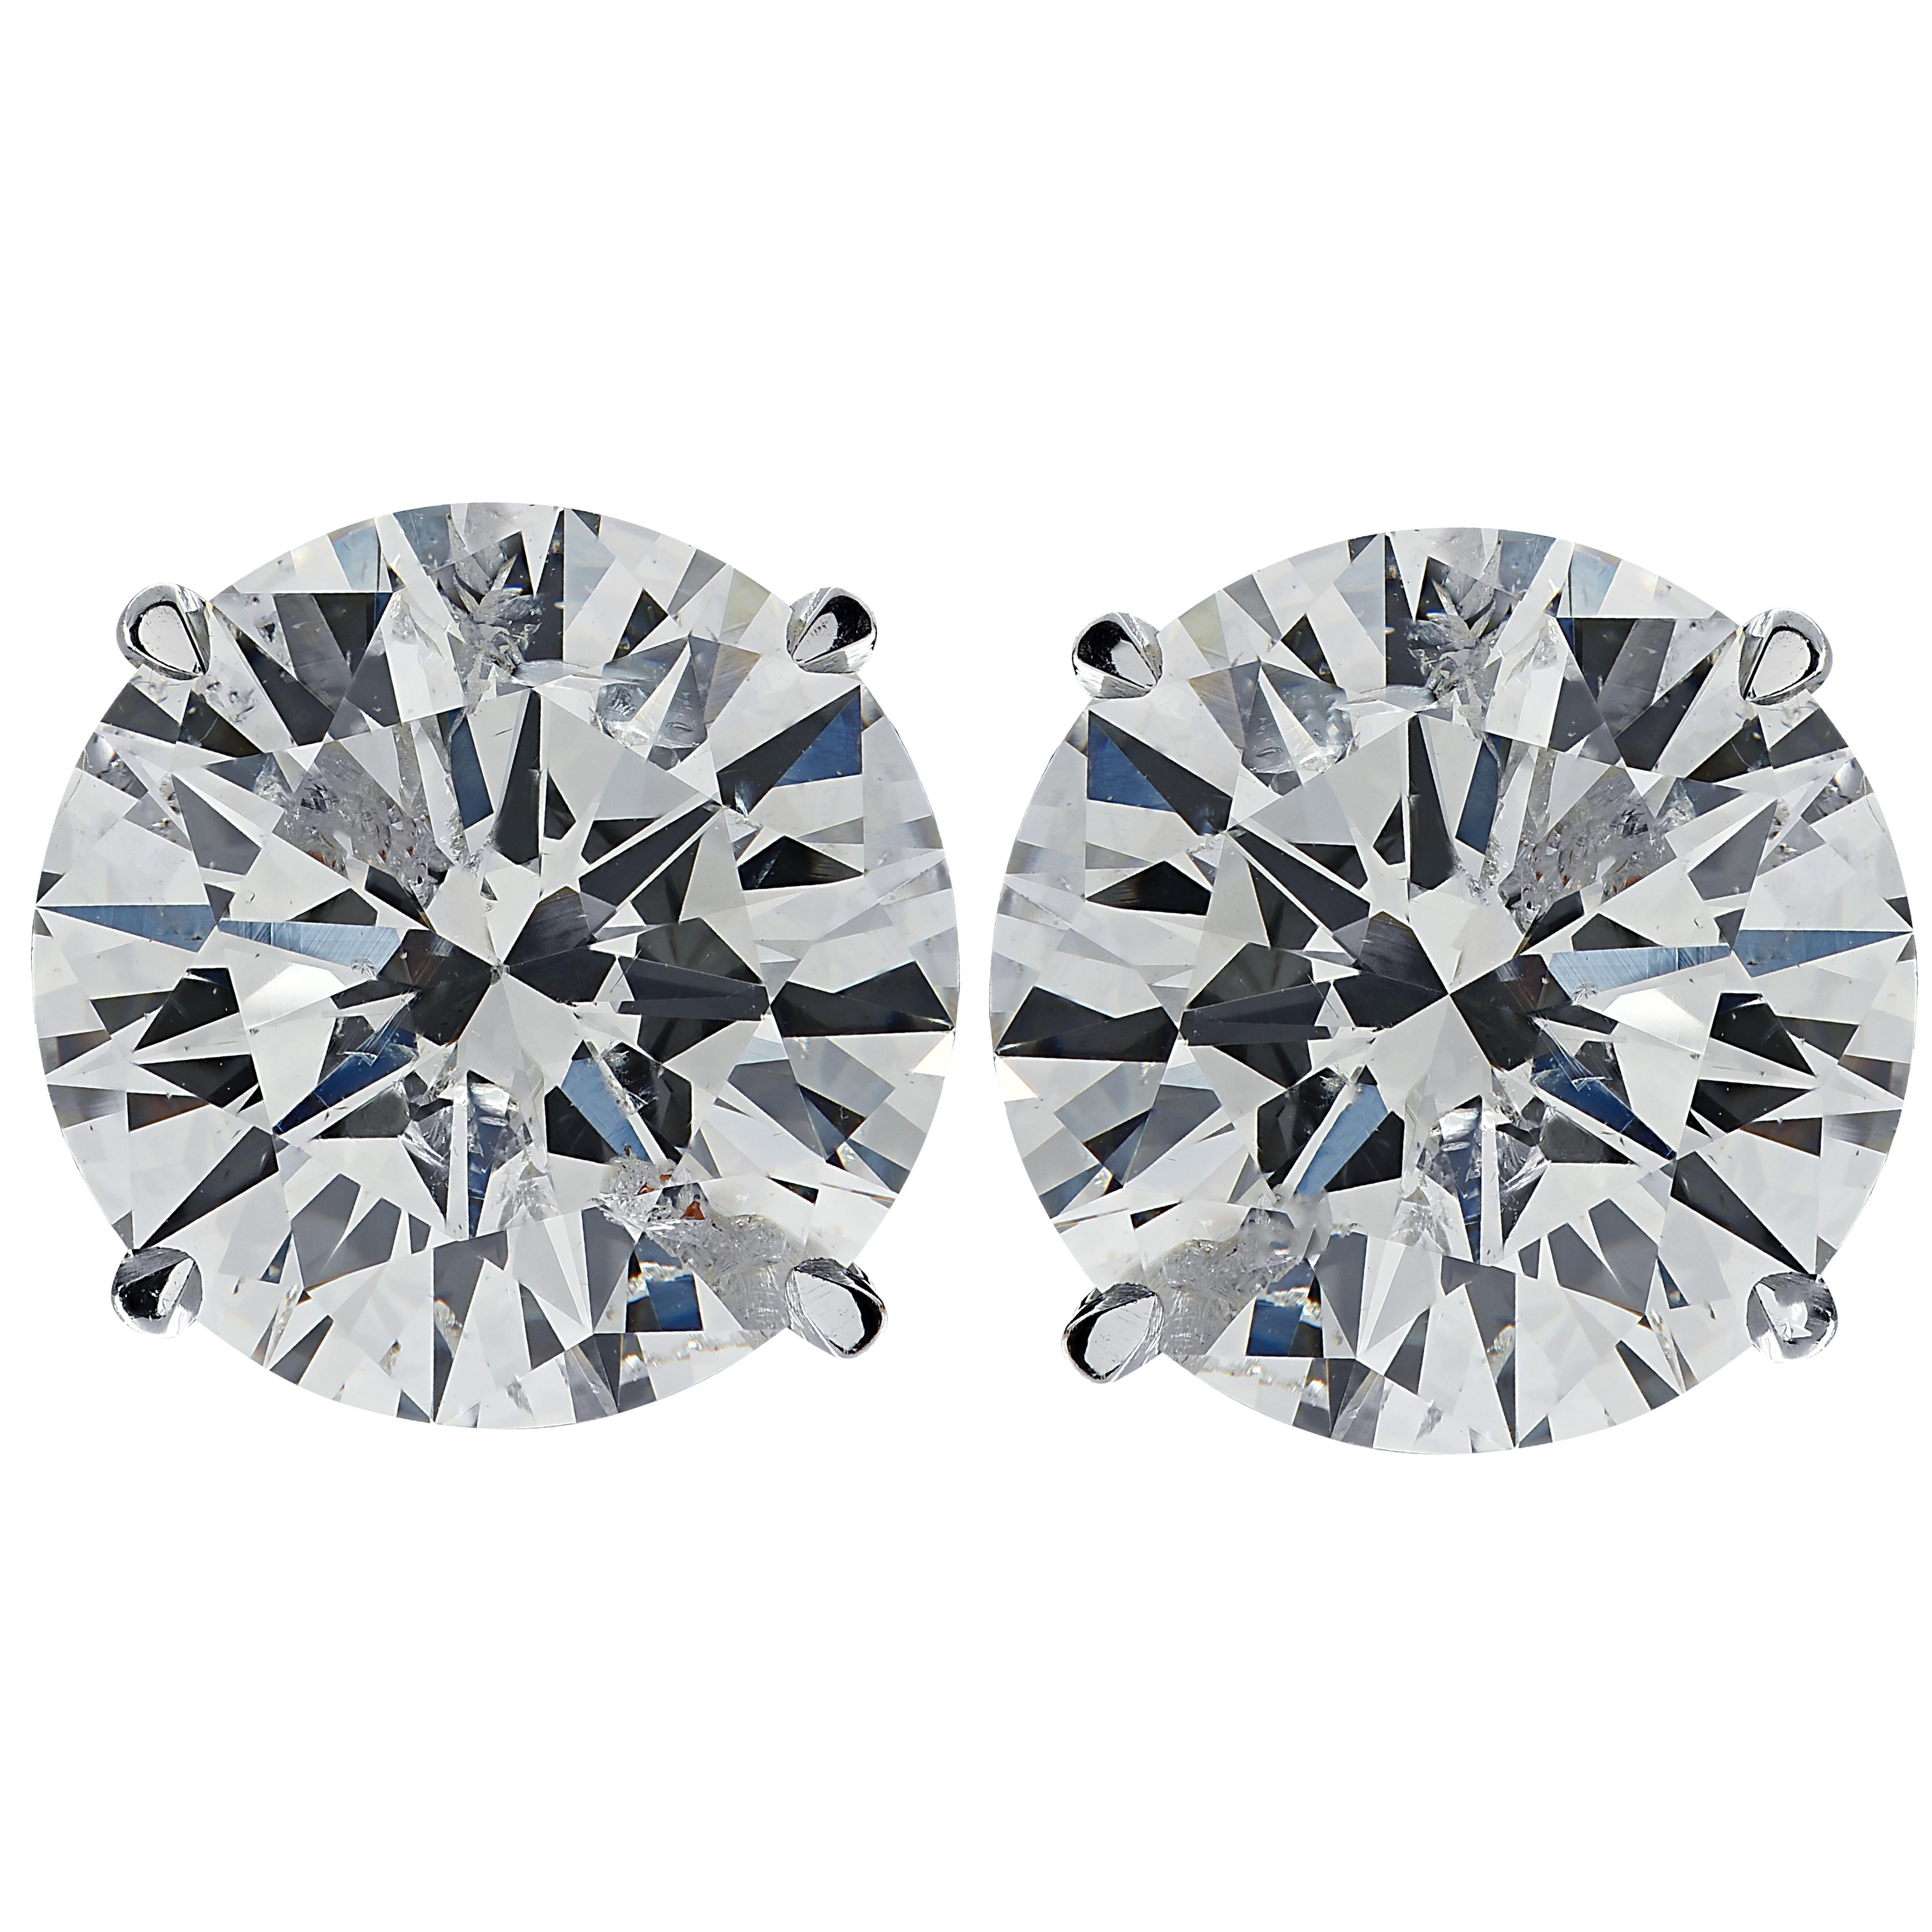 Stunning Vivid Diamonds solitaire stud earrings crafted in 18 karat white gold, showcasing 2 gorgeous GIA Certified round brilliant cut diamonds weighing 2.21 carats total, J-K color VS-SI clarity. These diamonds were carefully selected and